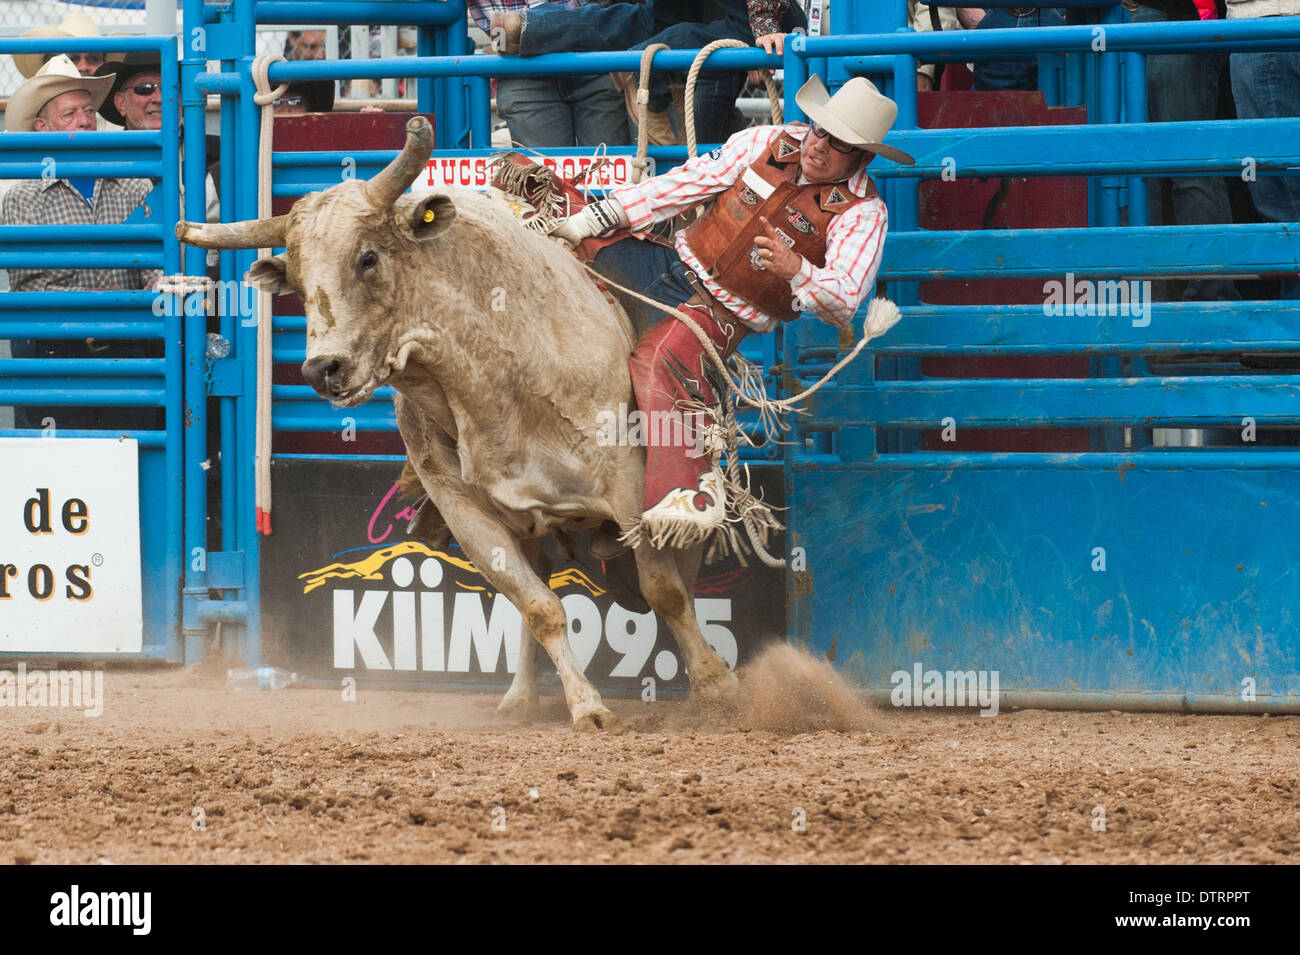 Tucson, Arizona, USA. 23rd Feb, 2014. CODY HANCOCK, of Taylor, Ariz., took the overall win in bull riding on ''Brush Hog II'' at the Fiesta de los Vaqueros in Tucson, Ariz. Not a single bull rider made the 8-second mark on the second ride, the point at which a score is recorded. mains one of the largest in the U.S. and saw record attendance of more than 60,000 people over six performances. Credit:  ZUMA Press, Inc./Alamy Live News Stock Photo